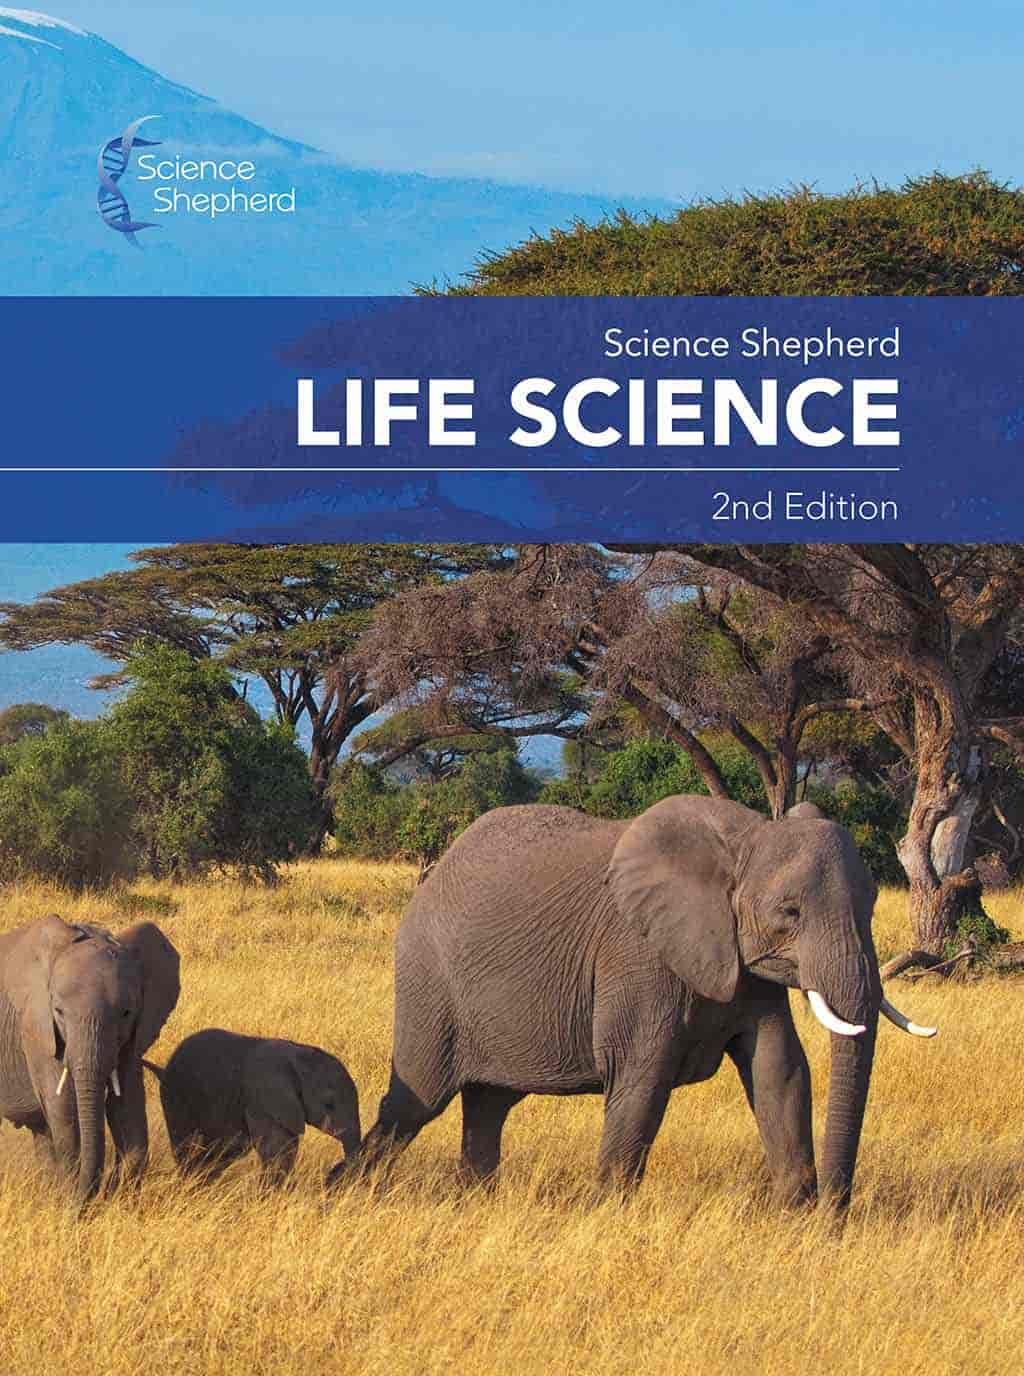 Life Science homeschool middle school science textbook 2nd edition cover of elephants